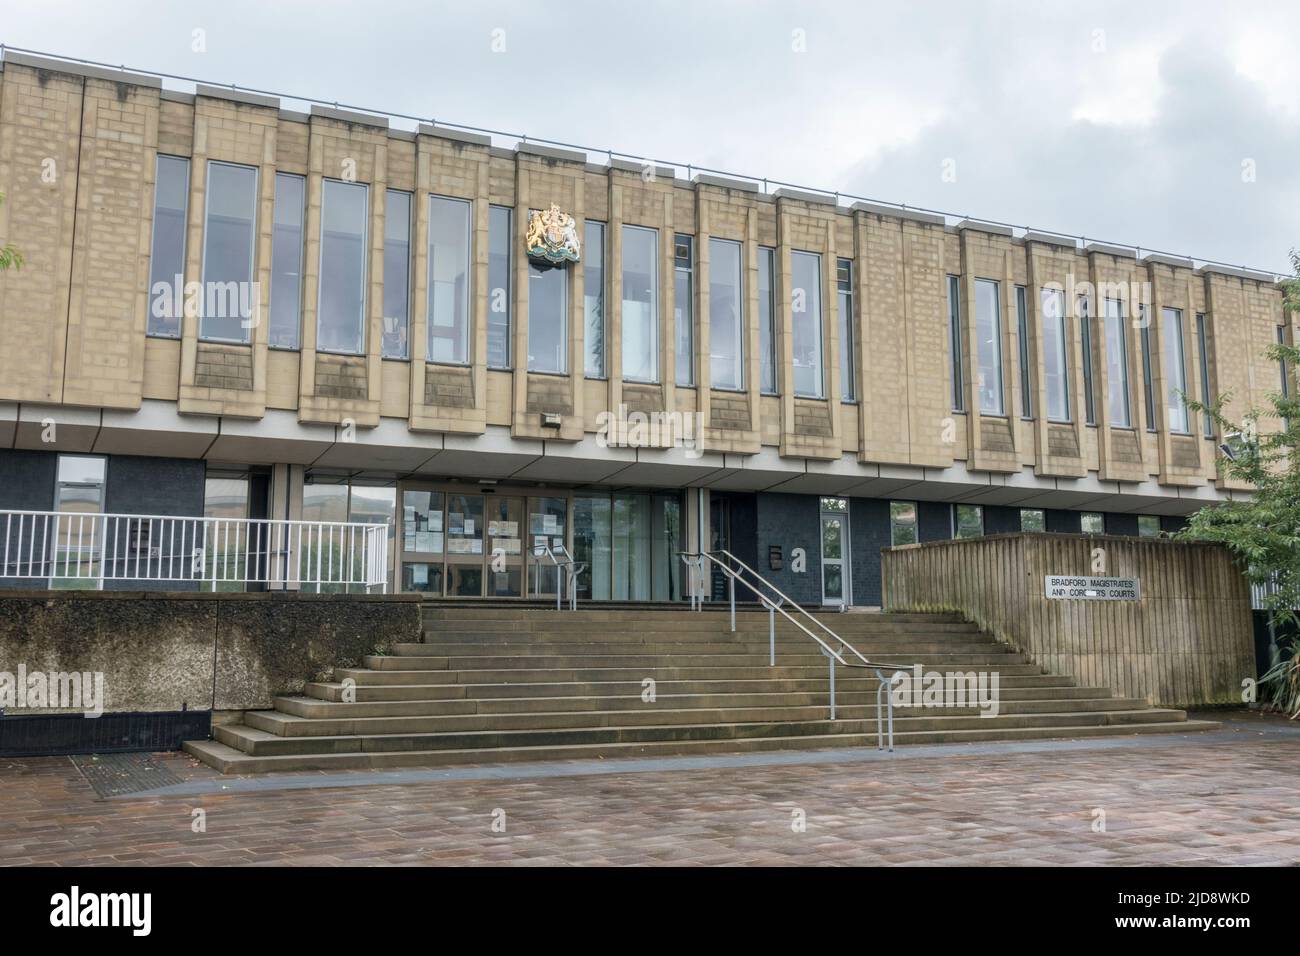 Bradford Magistrates' and Coroner's Courts in Bradford, West Yorkshire, England. Stockfoto